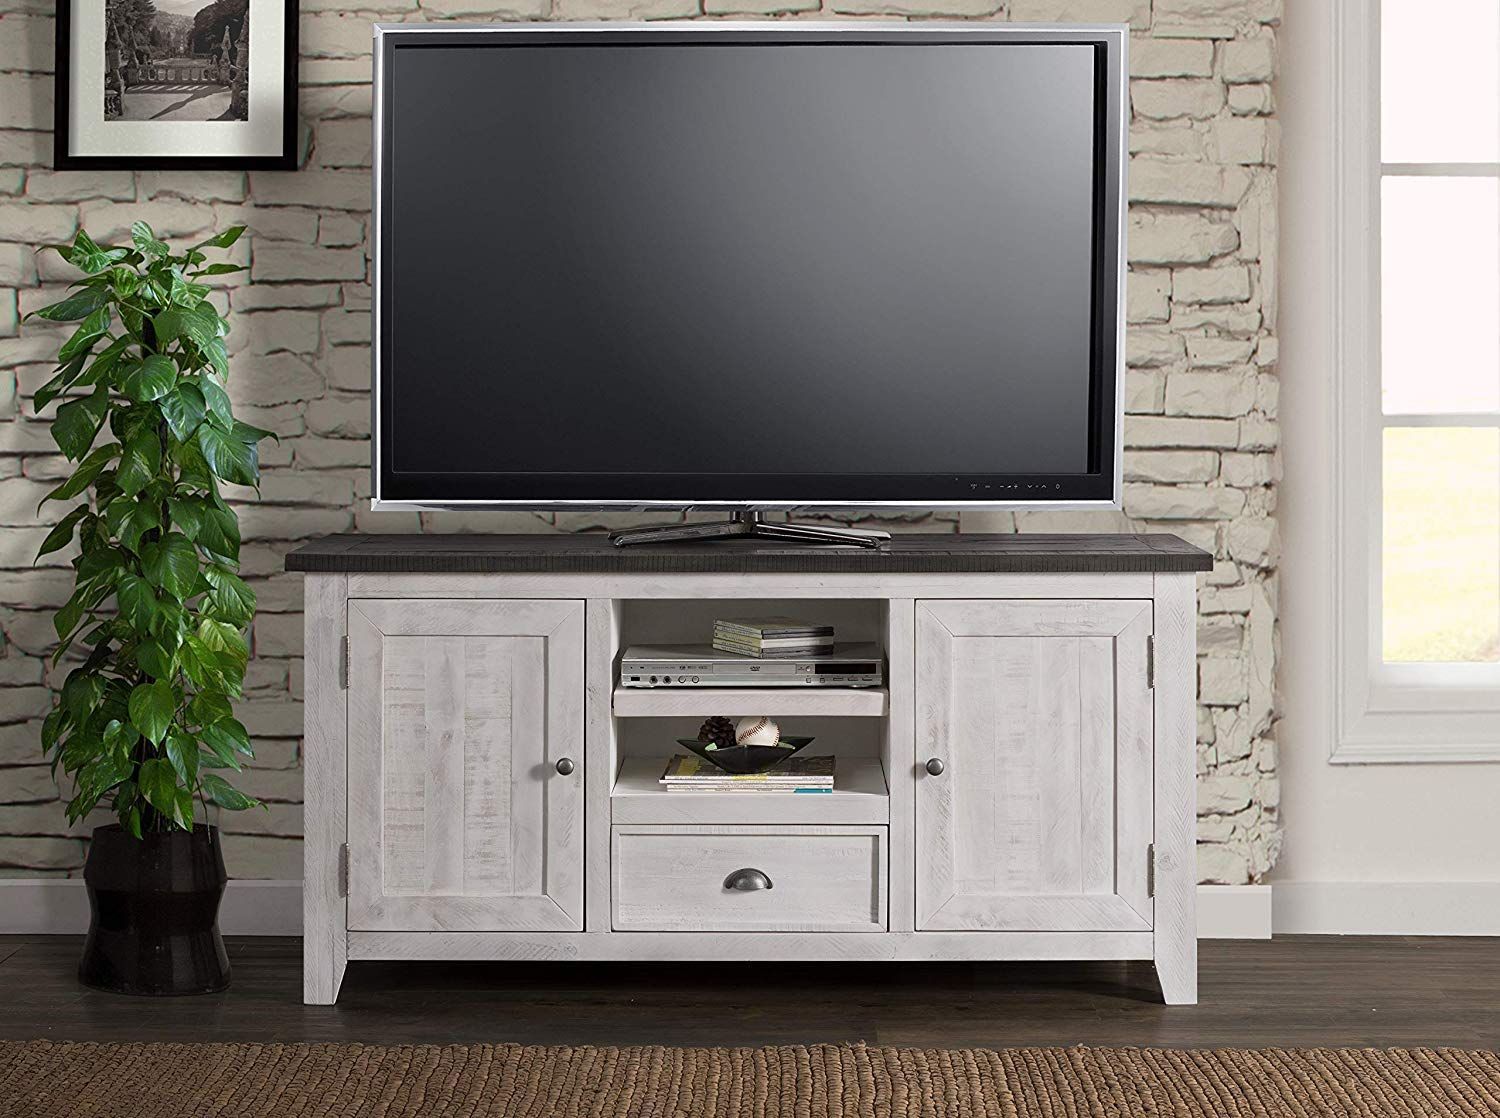 Farmhouse Tv Stand: Cozy And Functional Entertainment Centers – Farmhouse  Goals | Farmhouse Tv Stand, Rustic Tv Stand, Solid Wood Tv Stand Within Farmhouse Tv Stands (View 8 of 15)